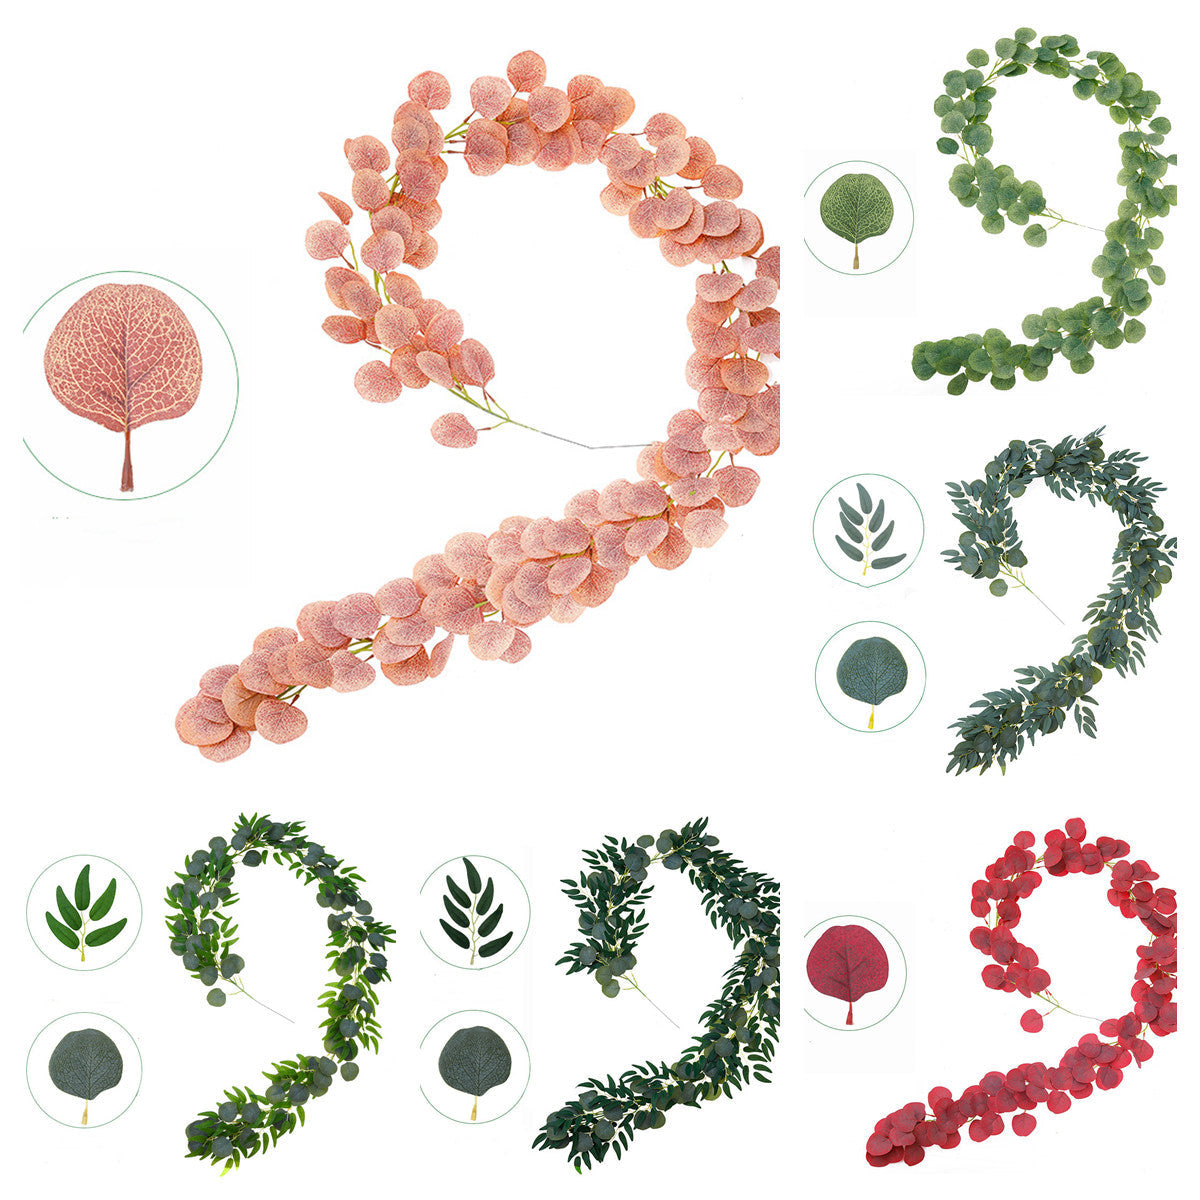 Bulk 6.5FT Artificial Eucalyptus Garland Greenery Hanging Vines for Wedding Table Runner Backdrop Party Centerpiece Wholesale